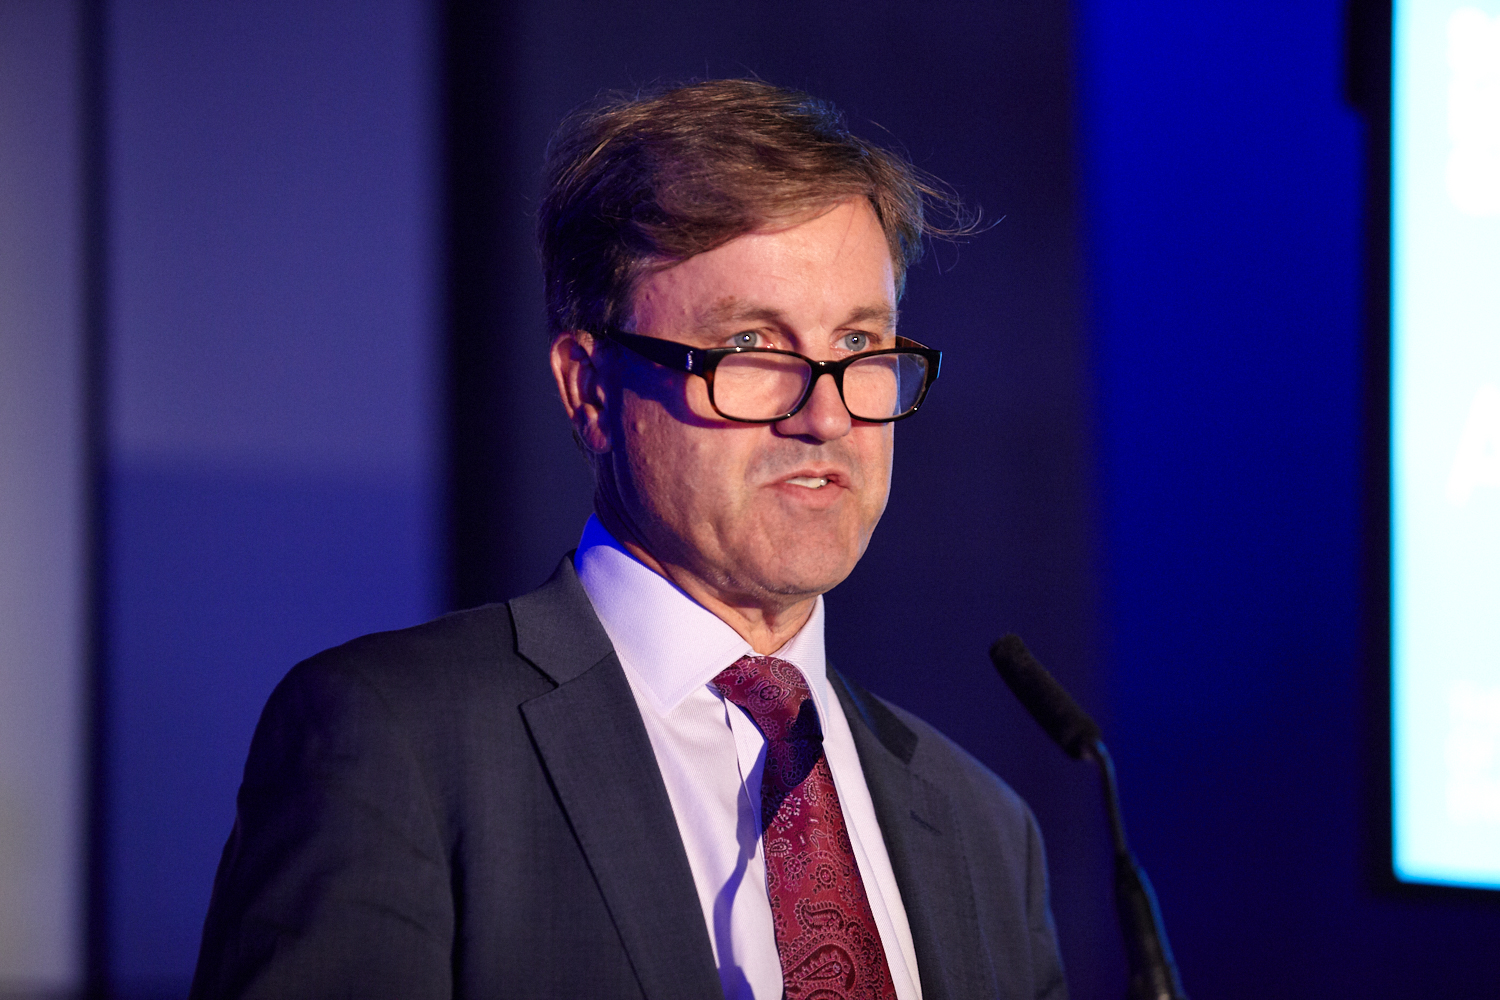 Peter Mather, Group Regional President, Europe and Head of Country, UK at BP. Image: Jody Kingzett